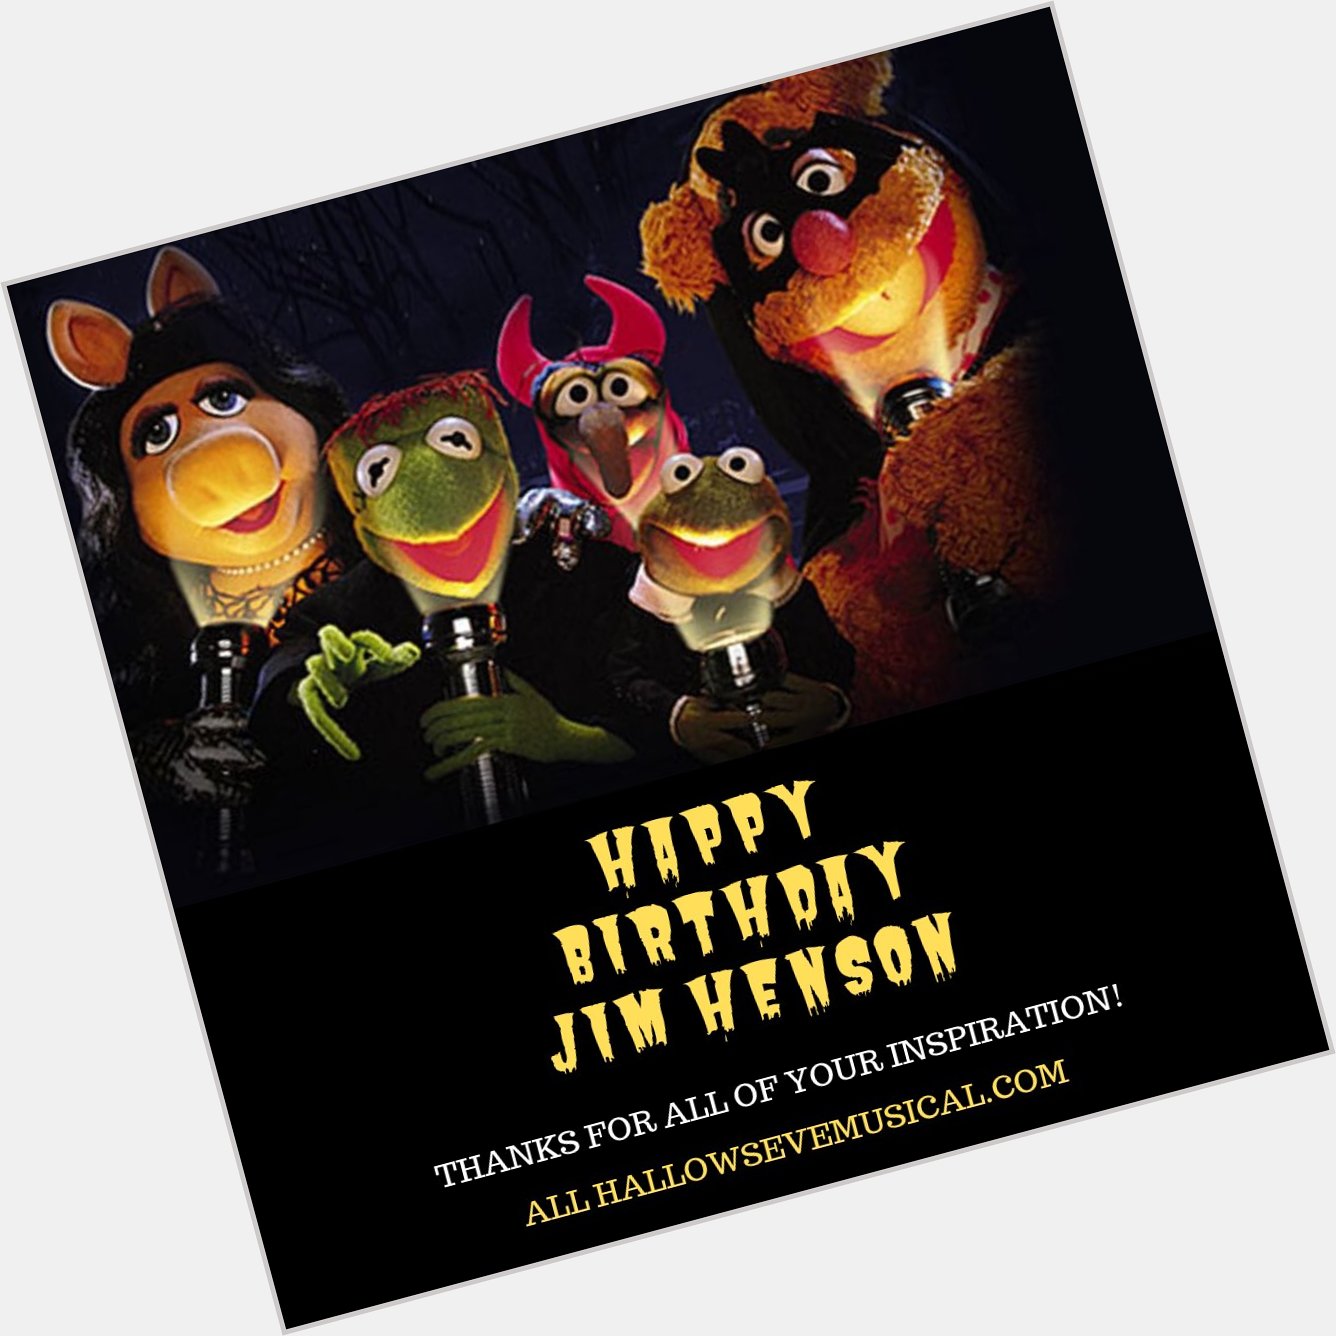 Happy Birthday Jim Henson. Thank you for being such an inspiration to puppeteers and story lovers everywhere! 